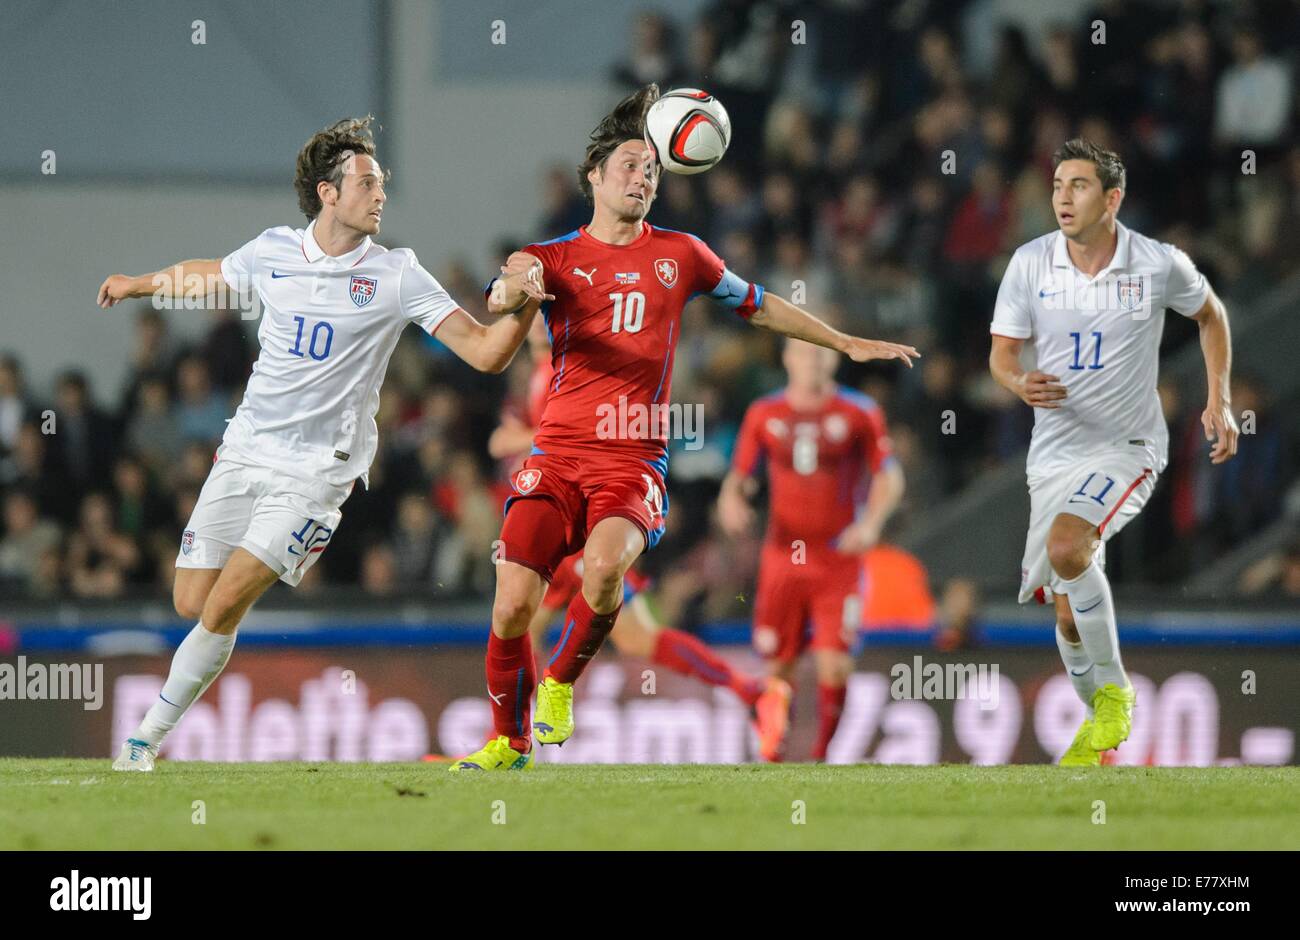 USA's Mix Diskerud (L) and Alejandro Bedoya vie for the ball with Czech Republic's Tomas Rosicky (C) during the soccer friendly between Czech Republic and USA in Prague, Czech Republic, 3 Septmember 2014. Photo: Thomas Eisenhuth/dpa - NO WIRE SERVICE - Stock Photo